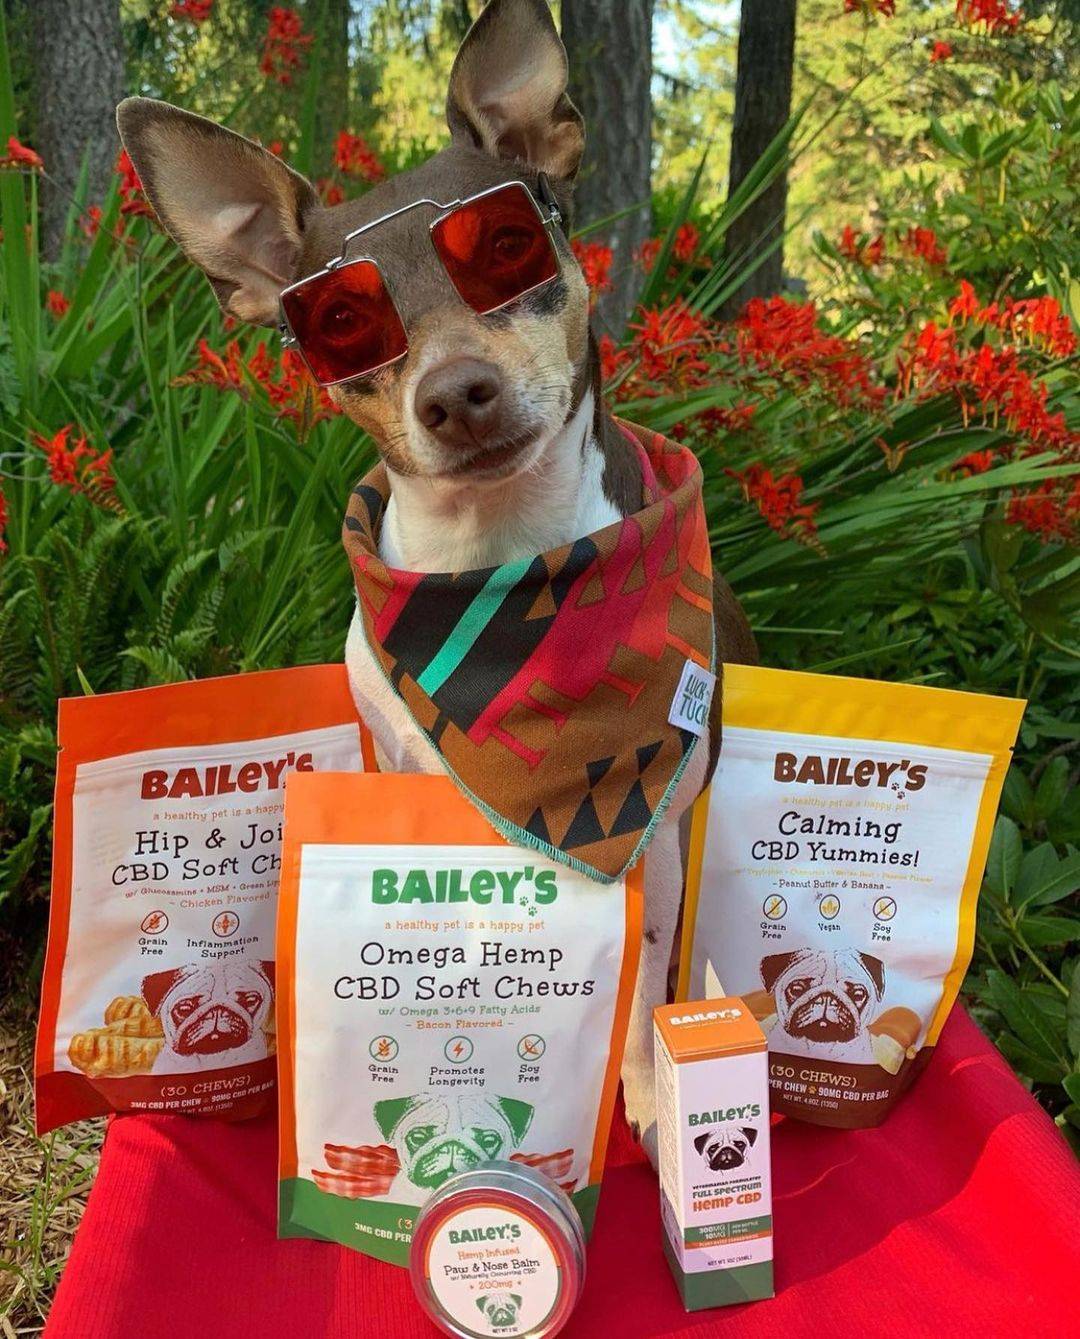 Image showing dog next to Bailey's CBD Pet Products